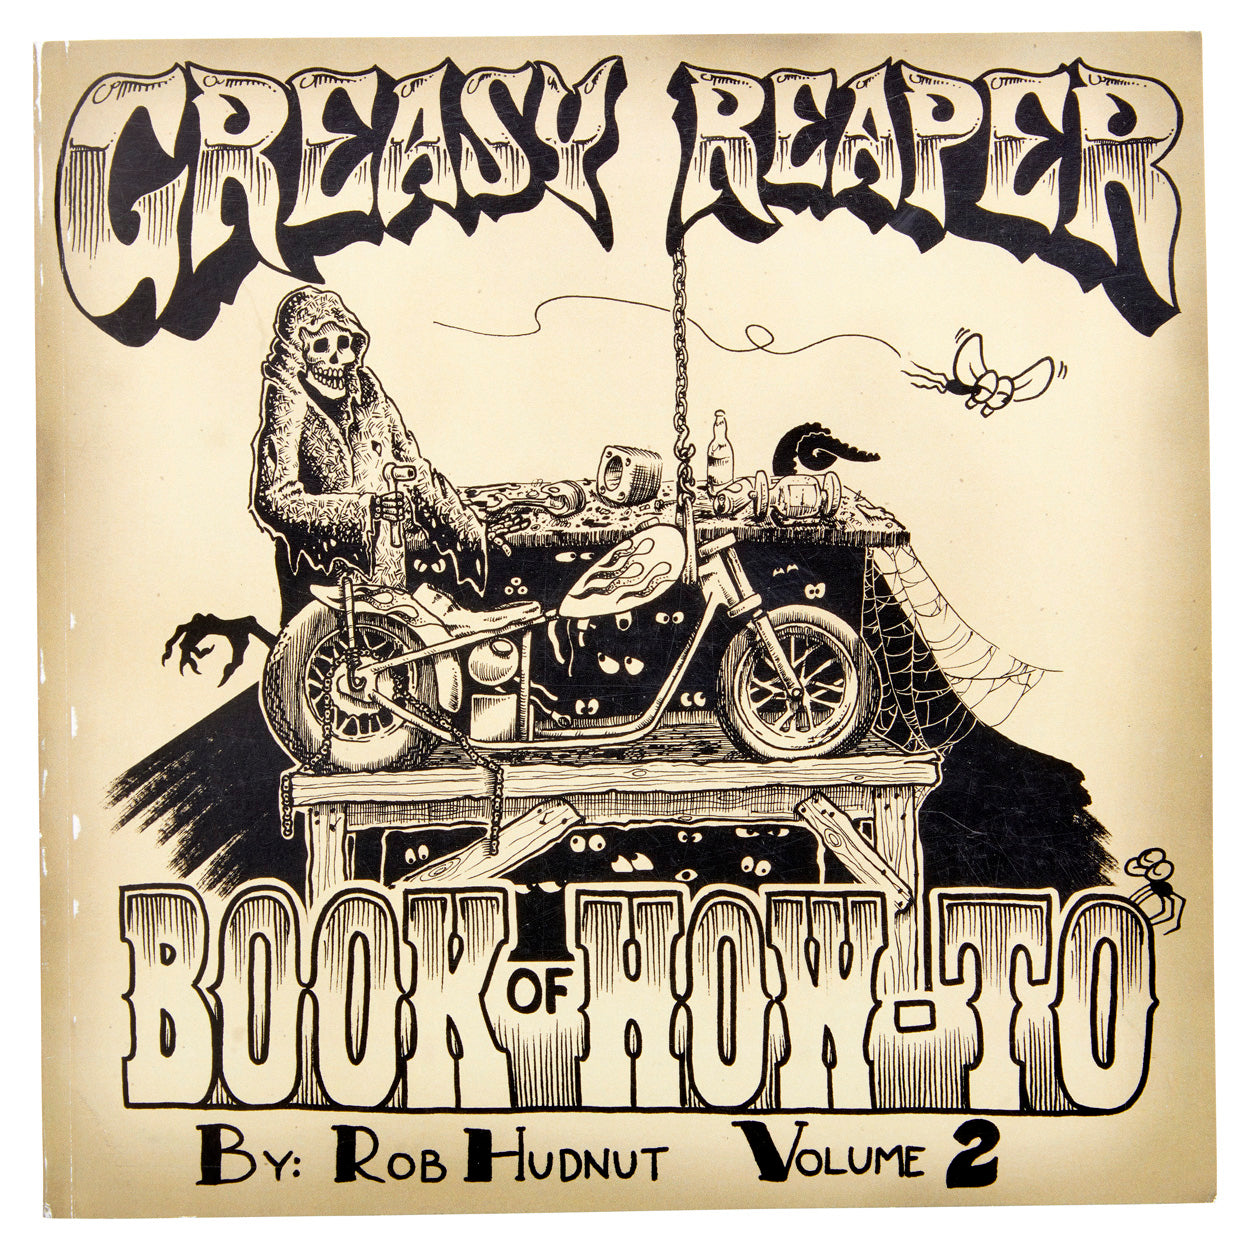 Greasy Reaper Book of How-To - Volume 2